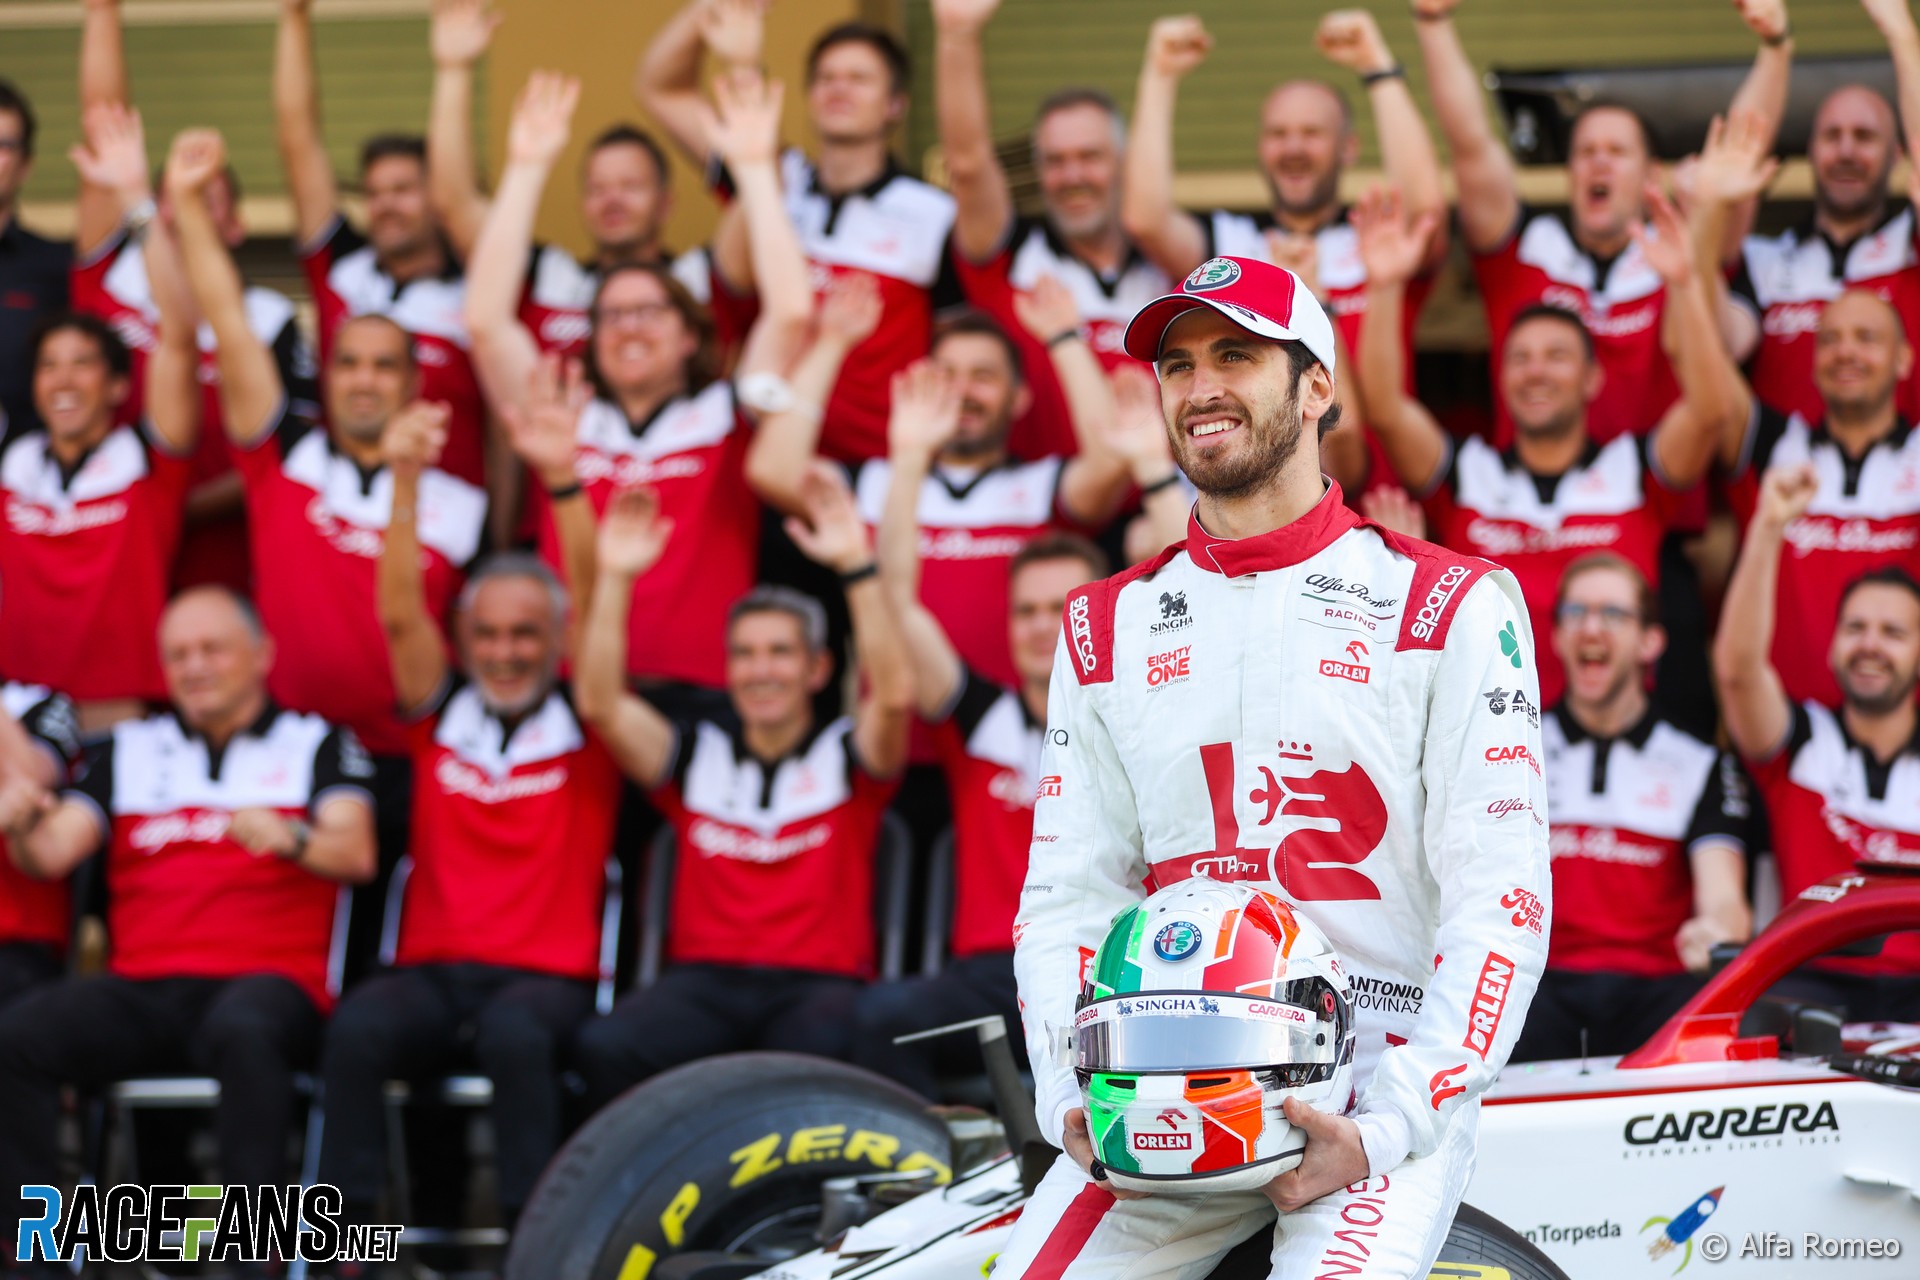 From super-sub to superfluous – Giovinazzi’s development not enough to save F1 career | 2021 F1 season review